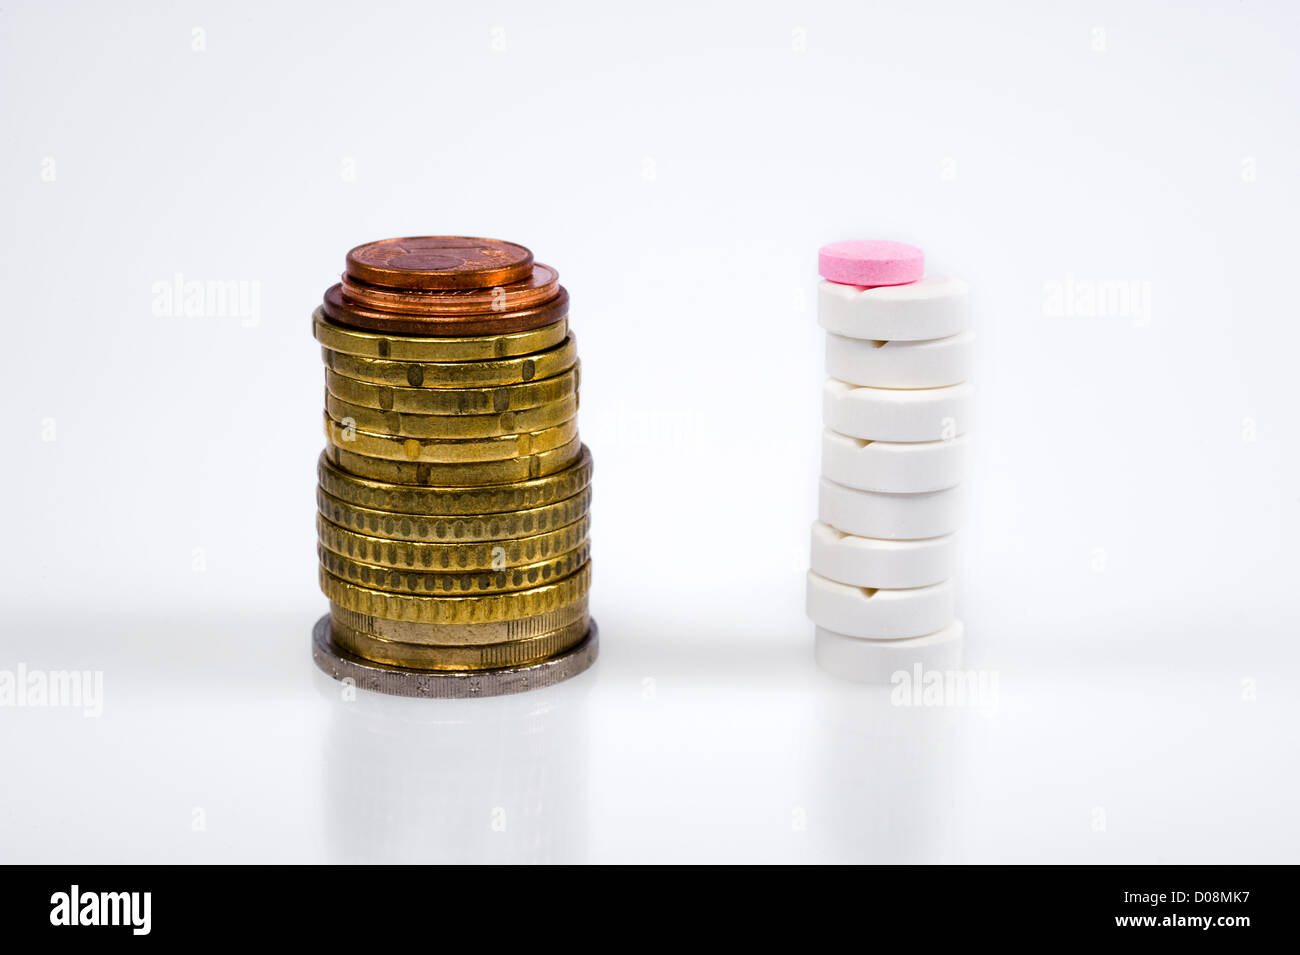 Stapled euro coins between pills and medicines Stock Photo